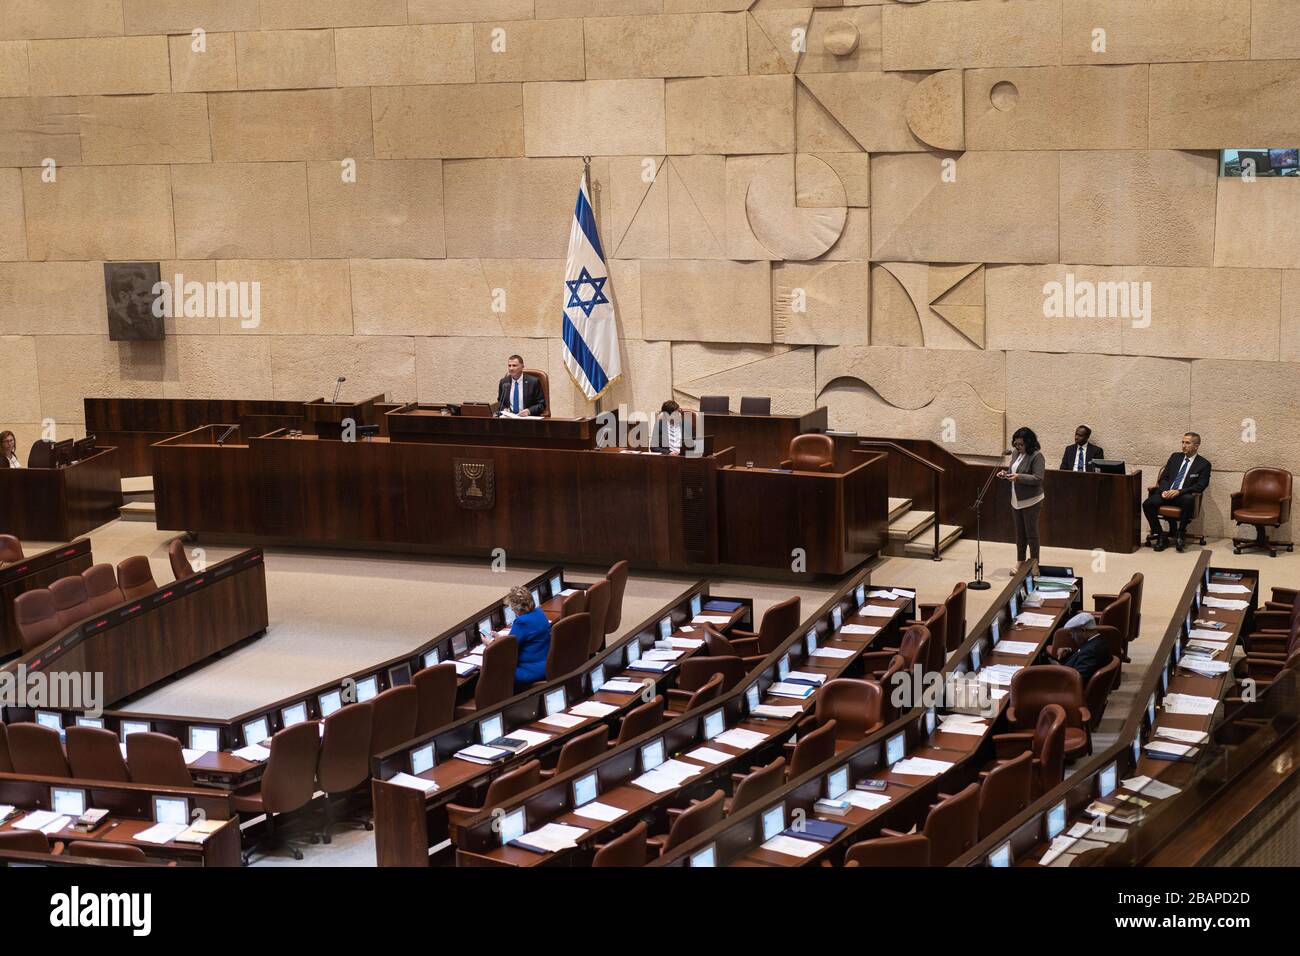 Pictures of Israeli Prime Ministers in The Knesset unicameral national legislature of Israel Stock Photo